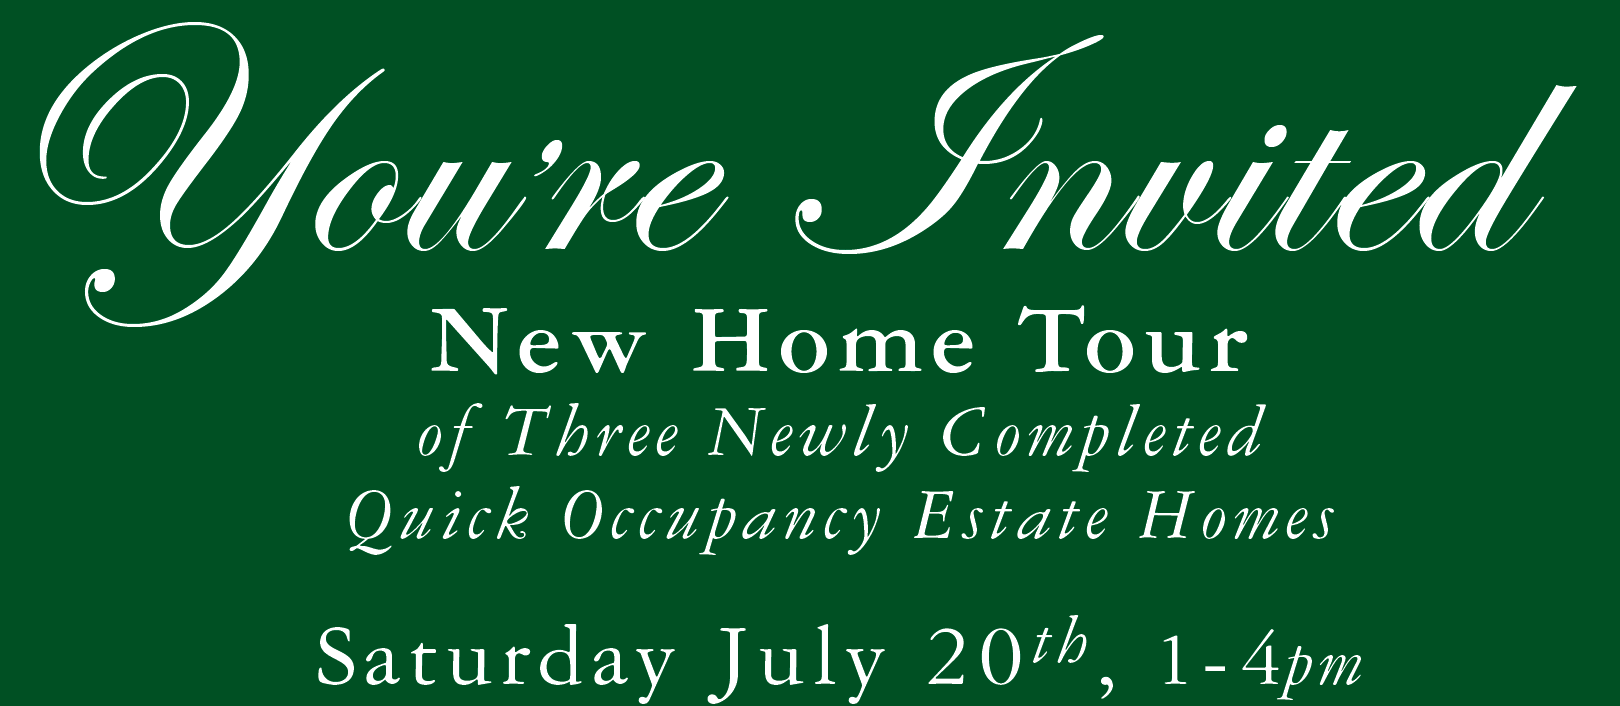 New Home Tour of Our Three Newly Completed Quick Occupancy Estate Homes!